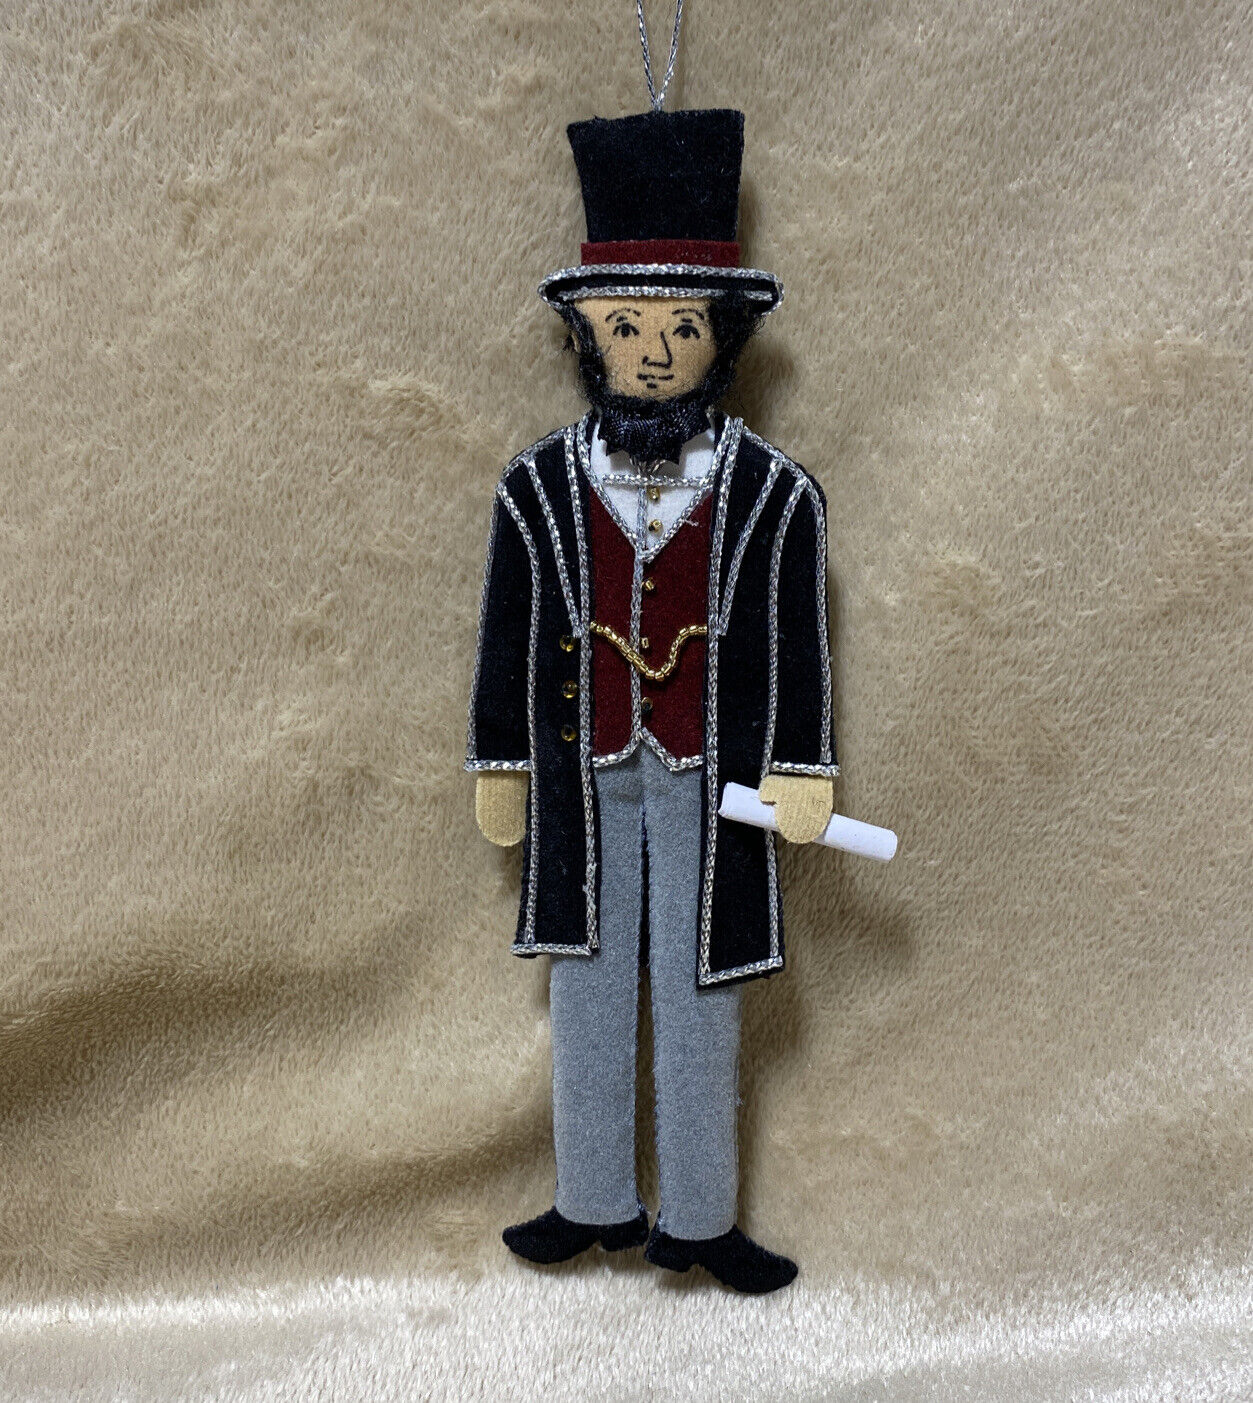 St. Nicolas Embroidered  Abraham Lincoln Ornament 6.25Inches Tall #9158LC NEW